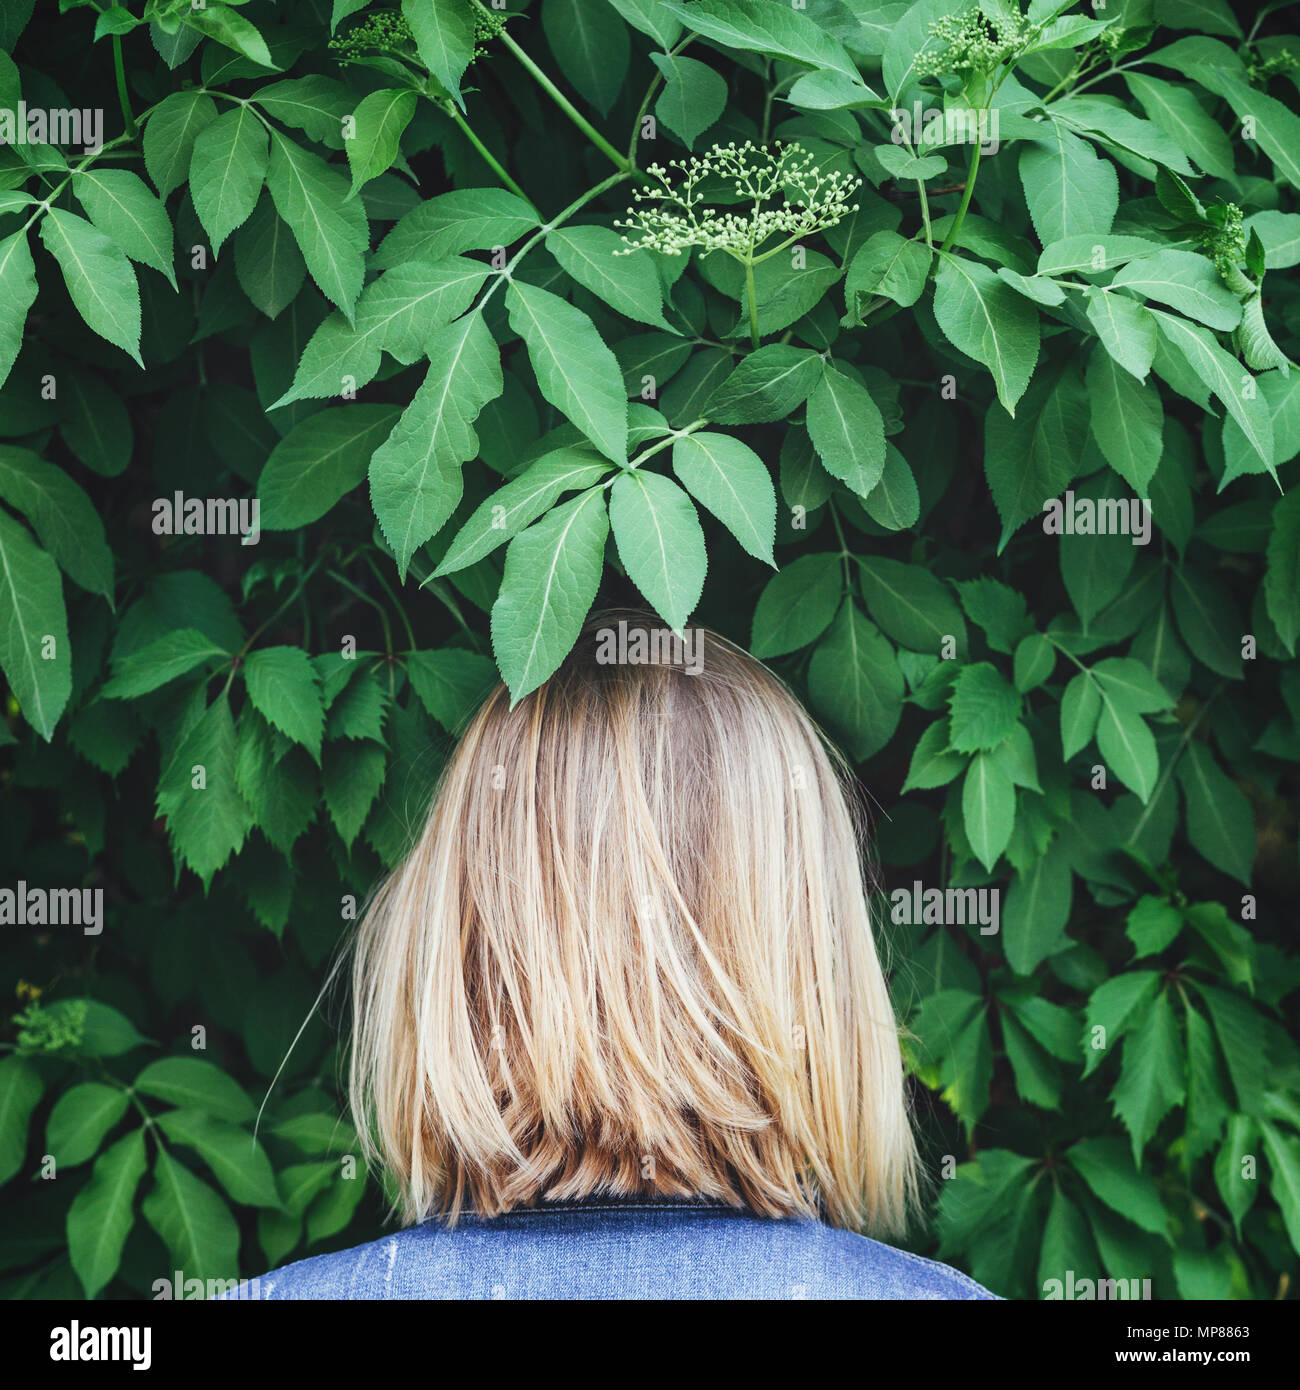 Blond woman standing backwards and looking on the green leaves. Conceptual realism, square. Stock Photo